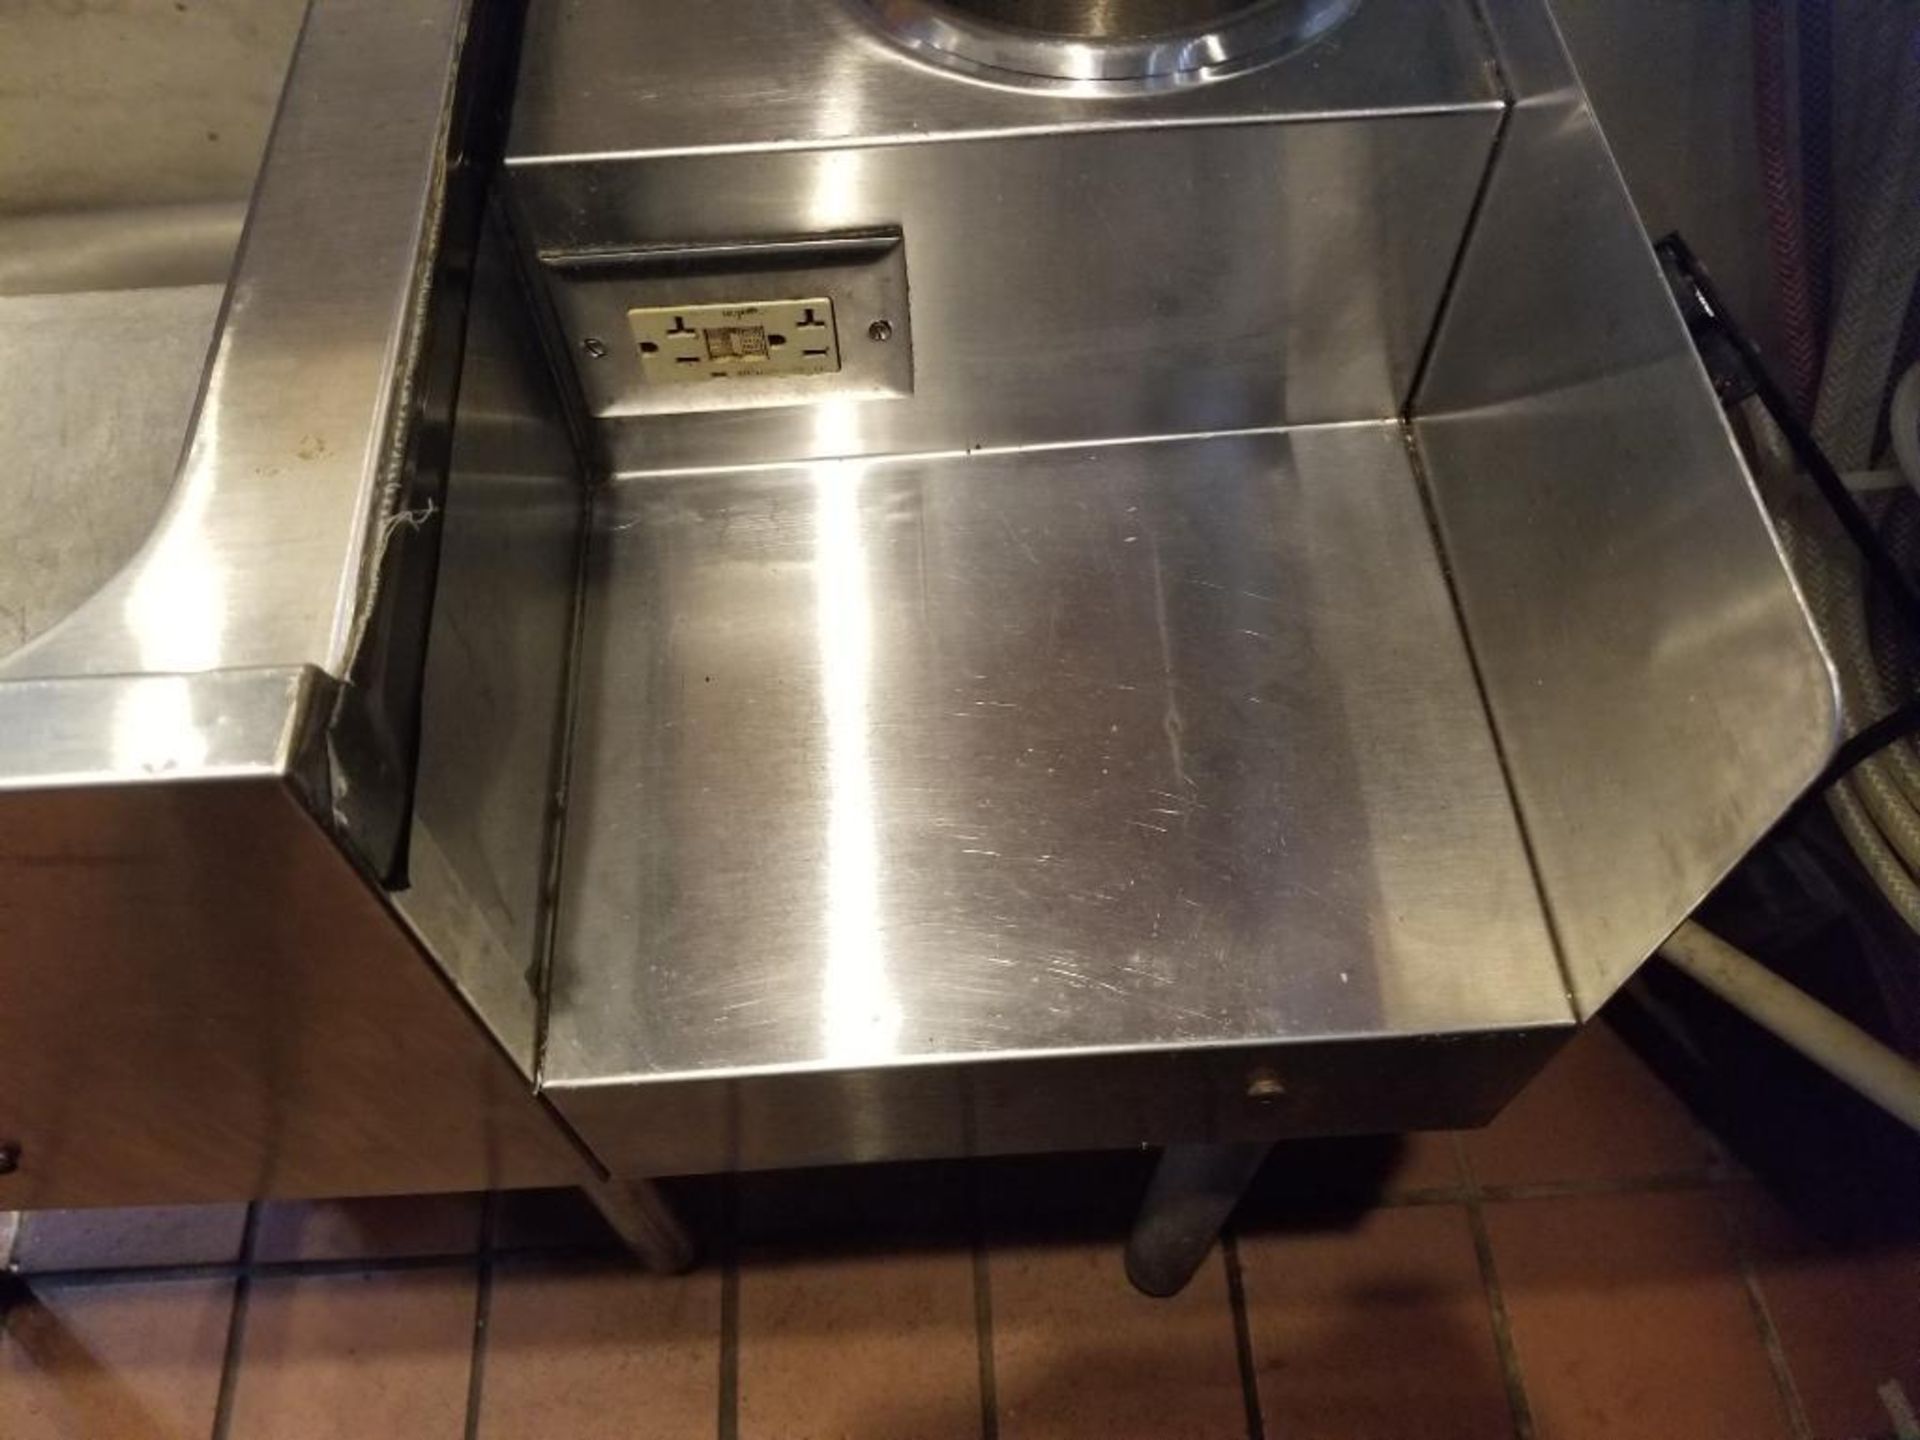 Stainless steel prep table. 36" x 18-1/2" x 31". - Image 3 of 10